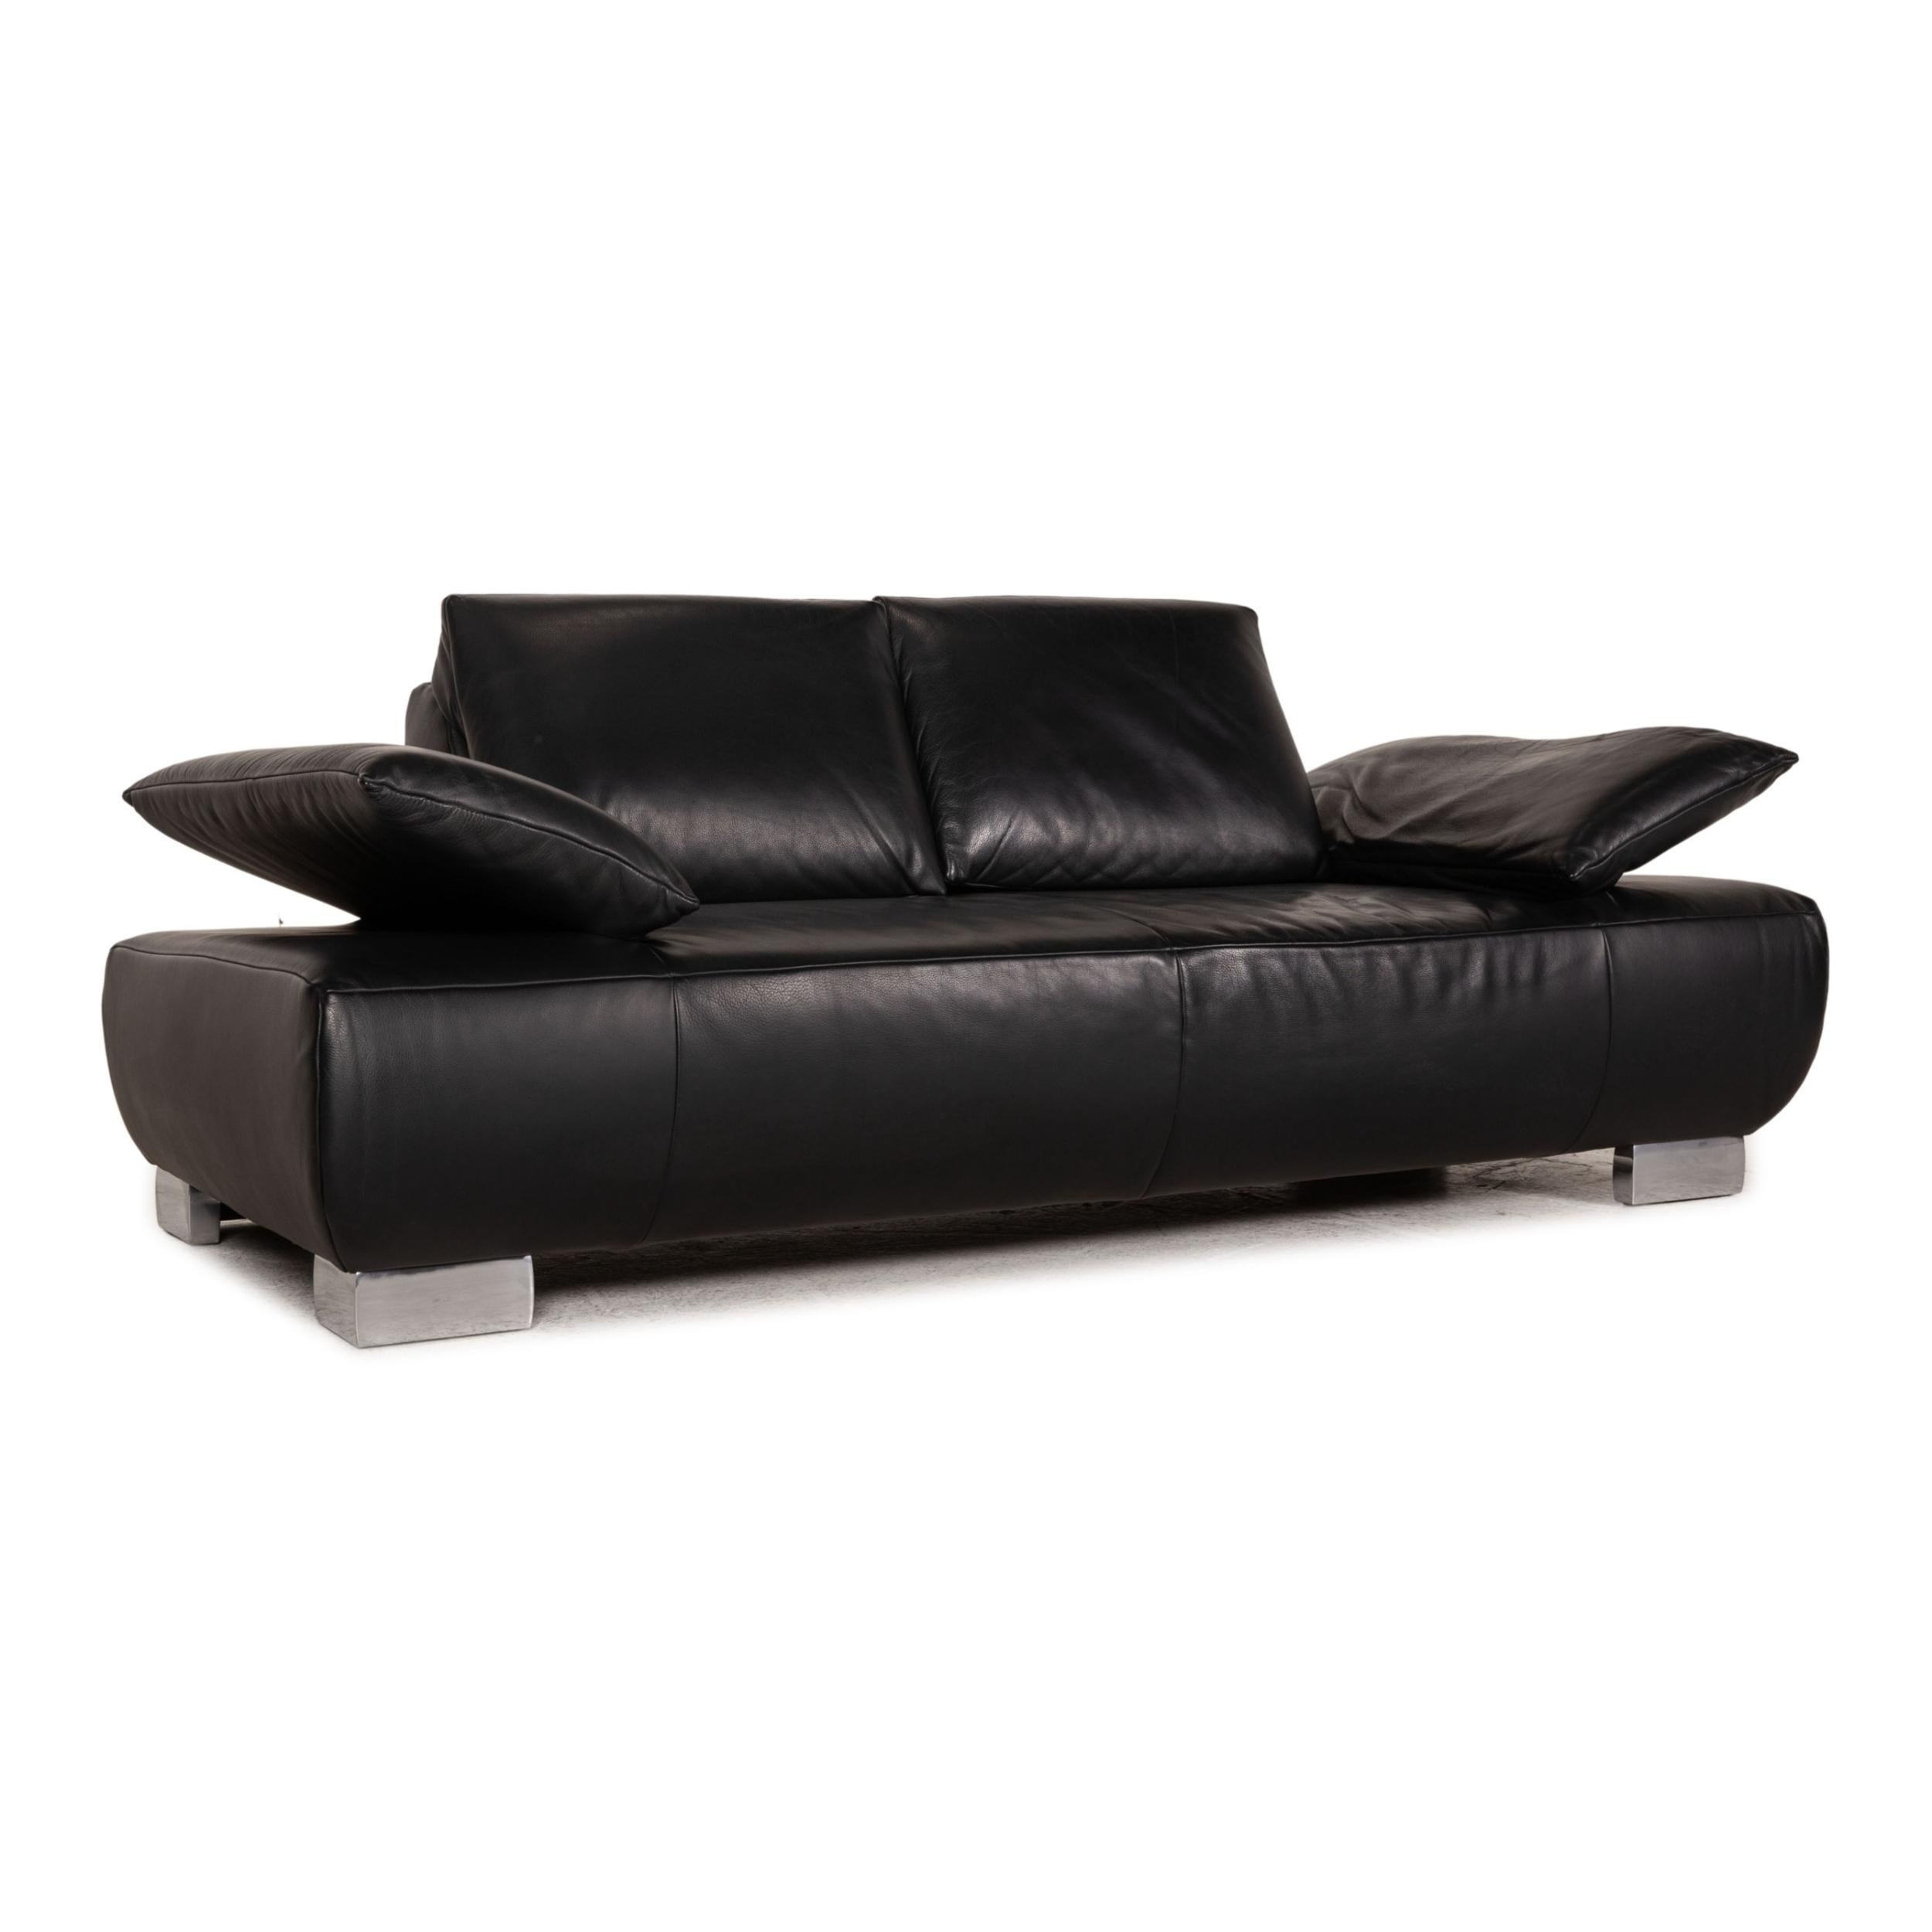 Koinor Volare Leather Sofa Black Two Seater Couch Function In Excellent Condition For Sale In Cologne, DE